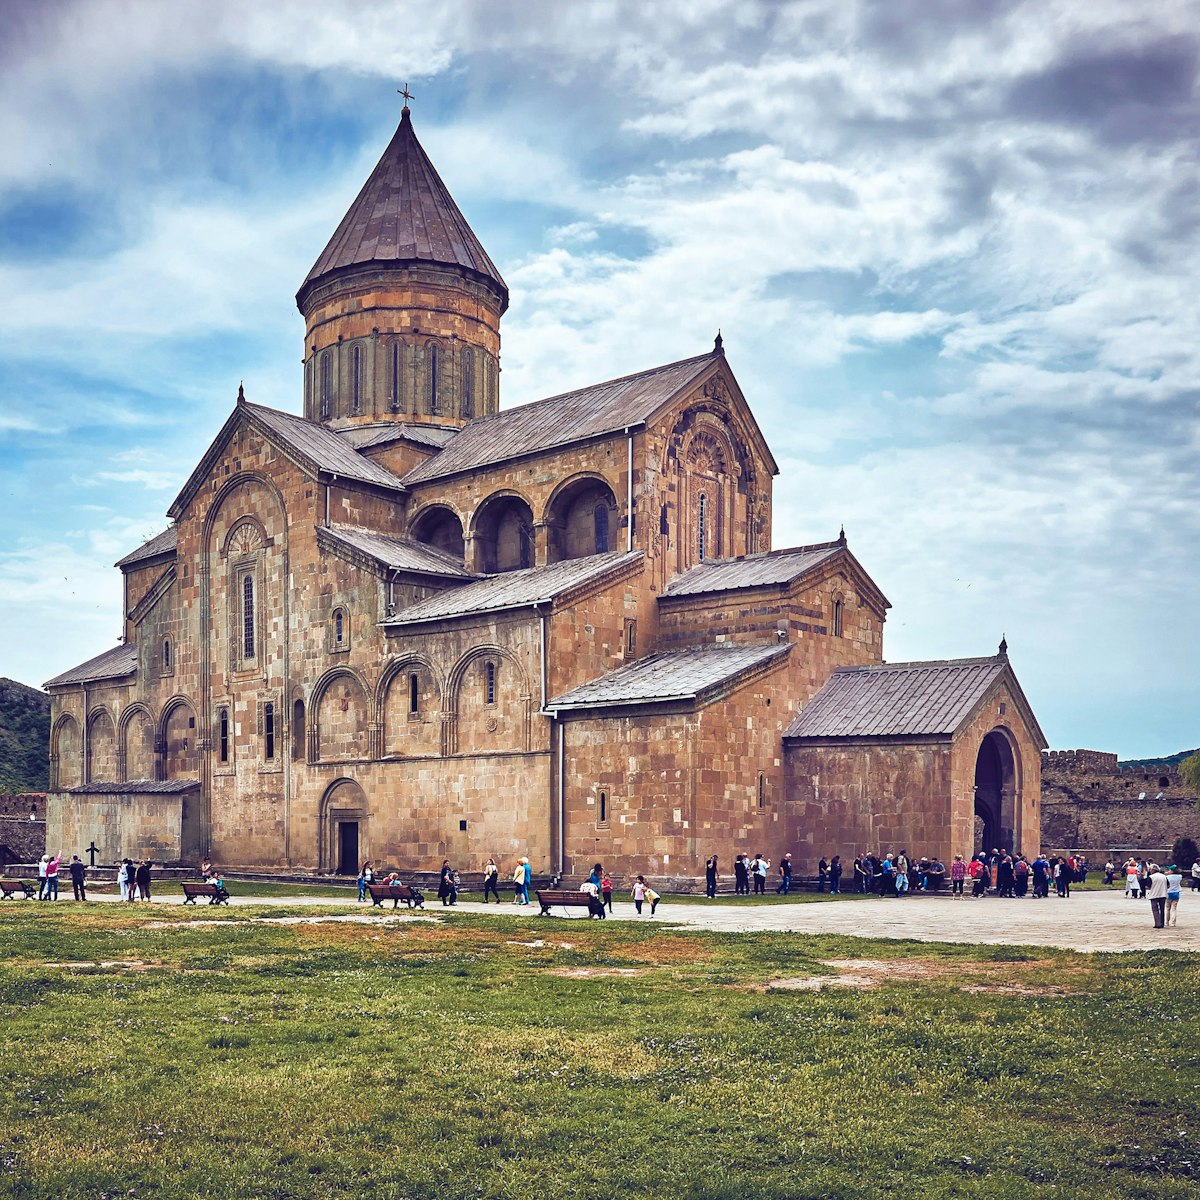 Svetitskhoveli Cathedral in Mtskheta, Georgia; Shutterstock ID 509083501; Your name (First / Last): Gemma Graham; GL account no.: 65050; Netsuite department name: Online Editorial; Full Product or Project name including edition: Georgia destination page masthead and POI images